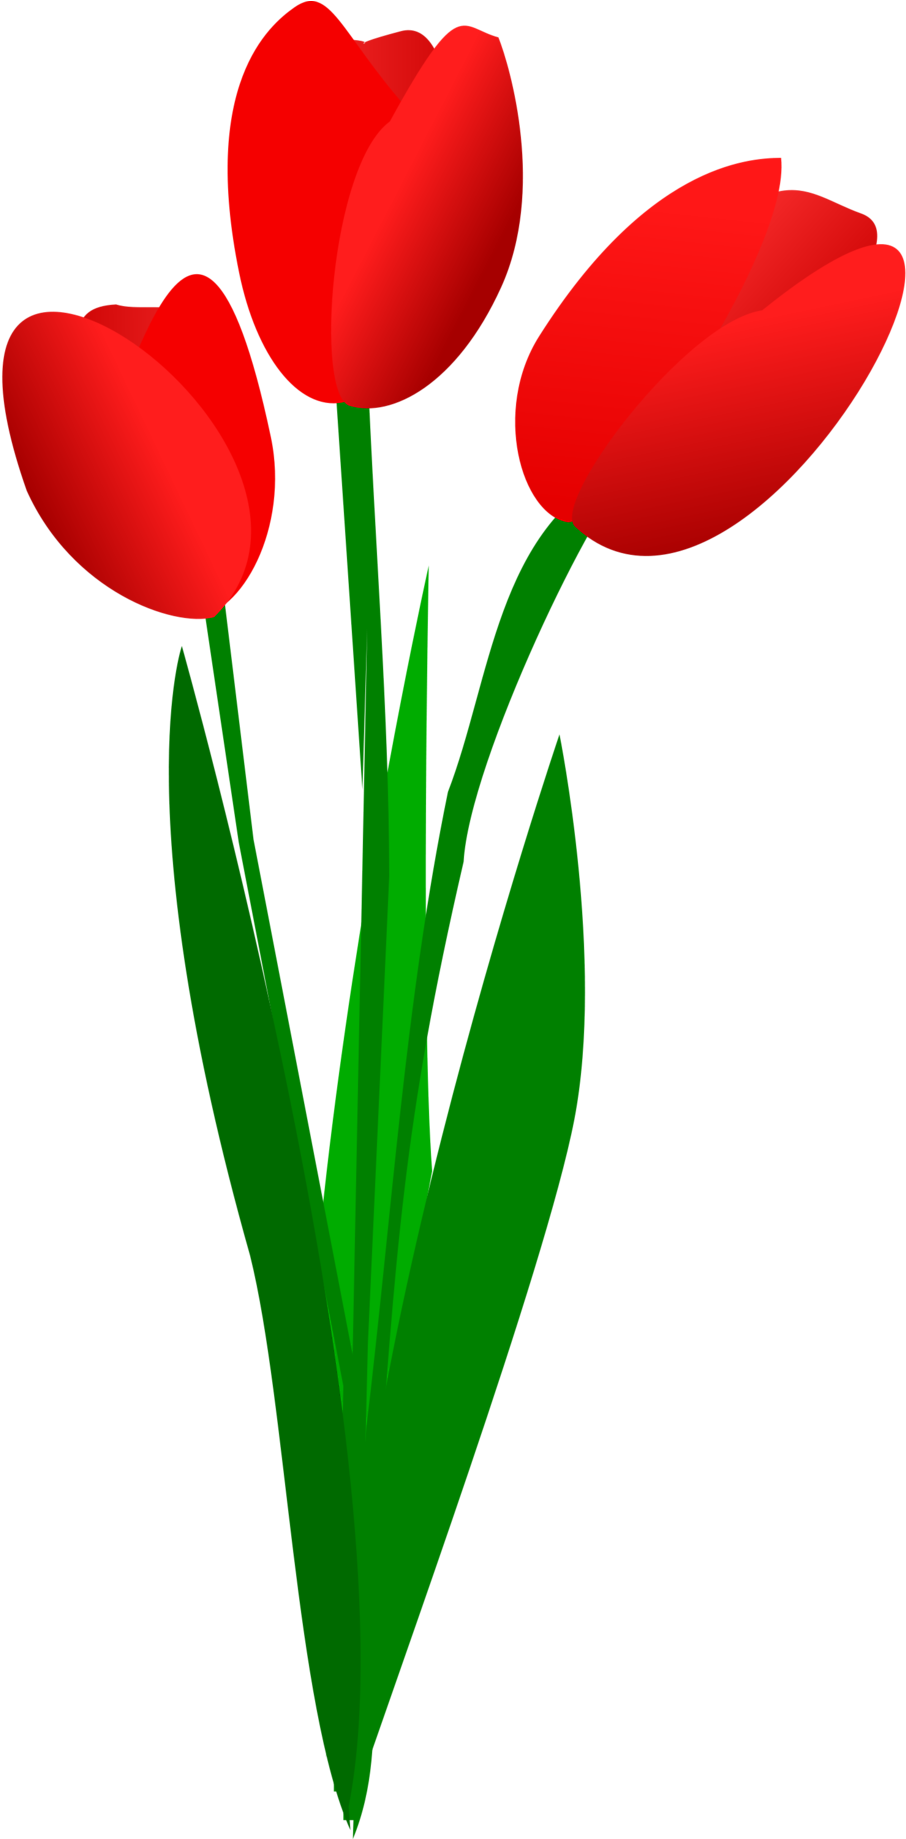 Red Tulips Vector Illustration PNG